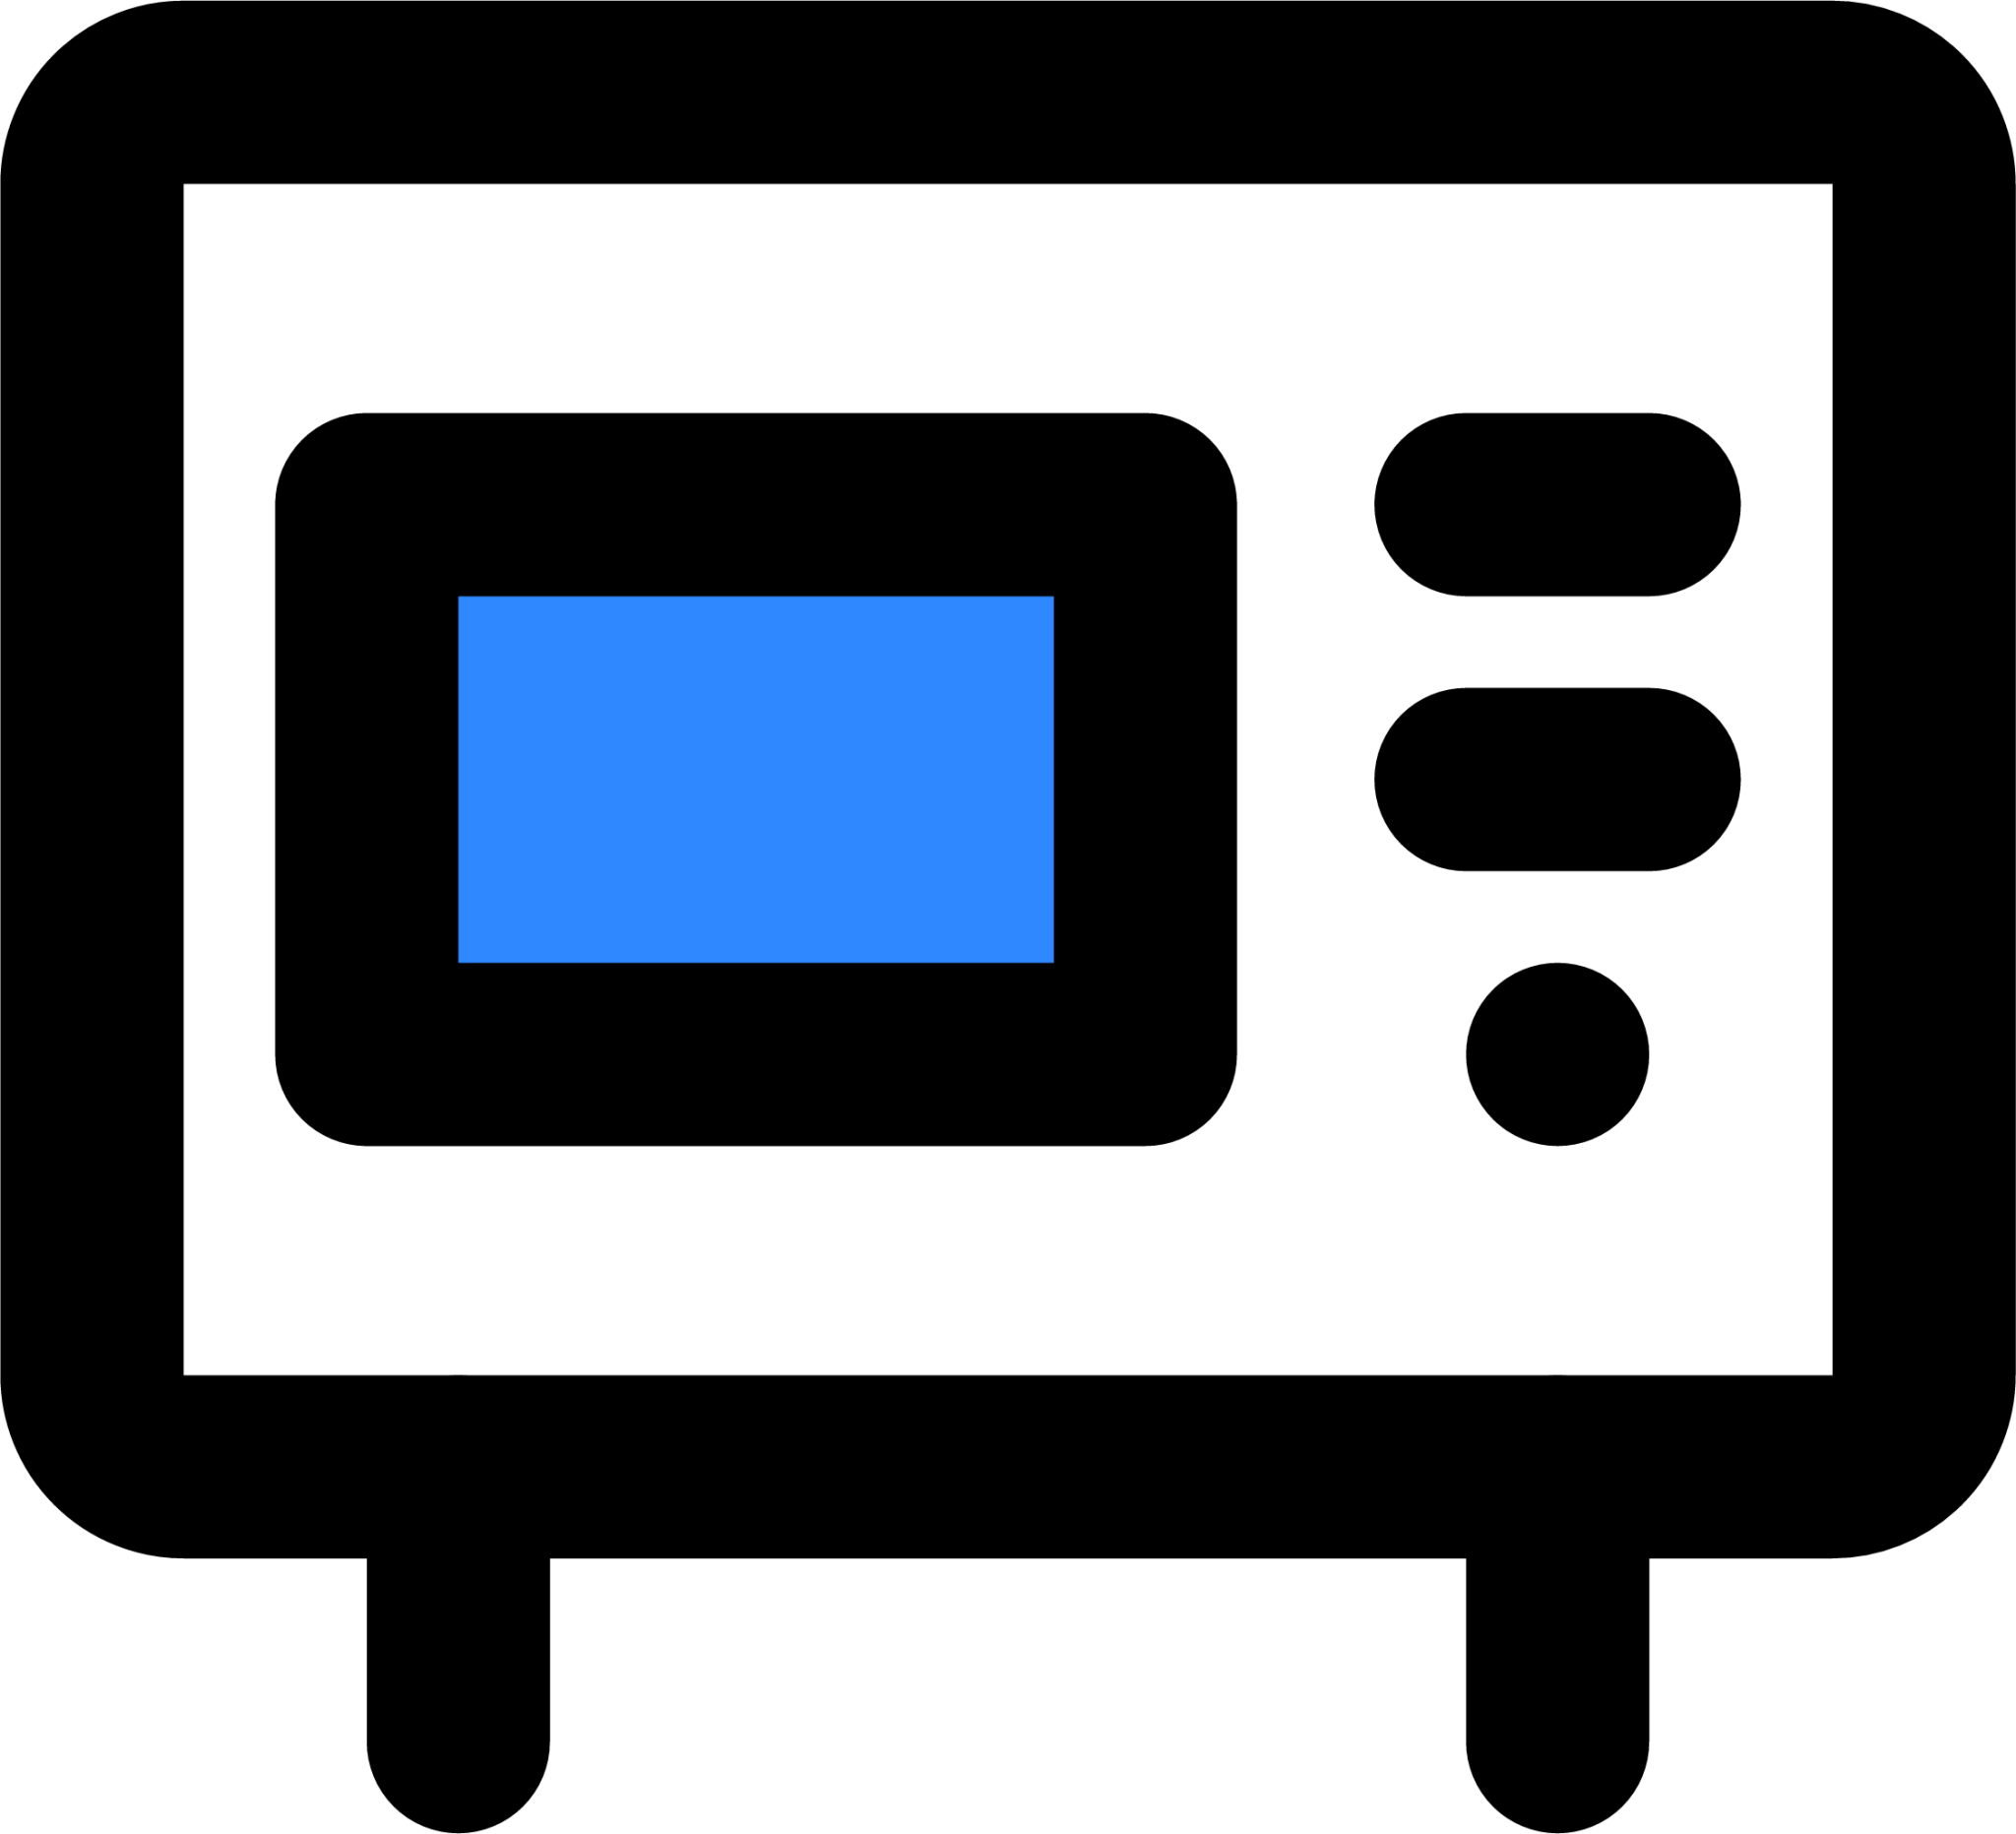 microwave oven icon